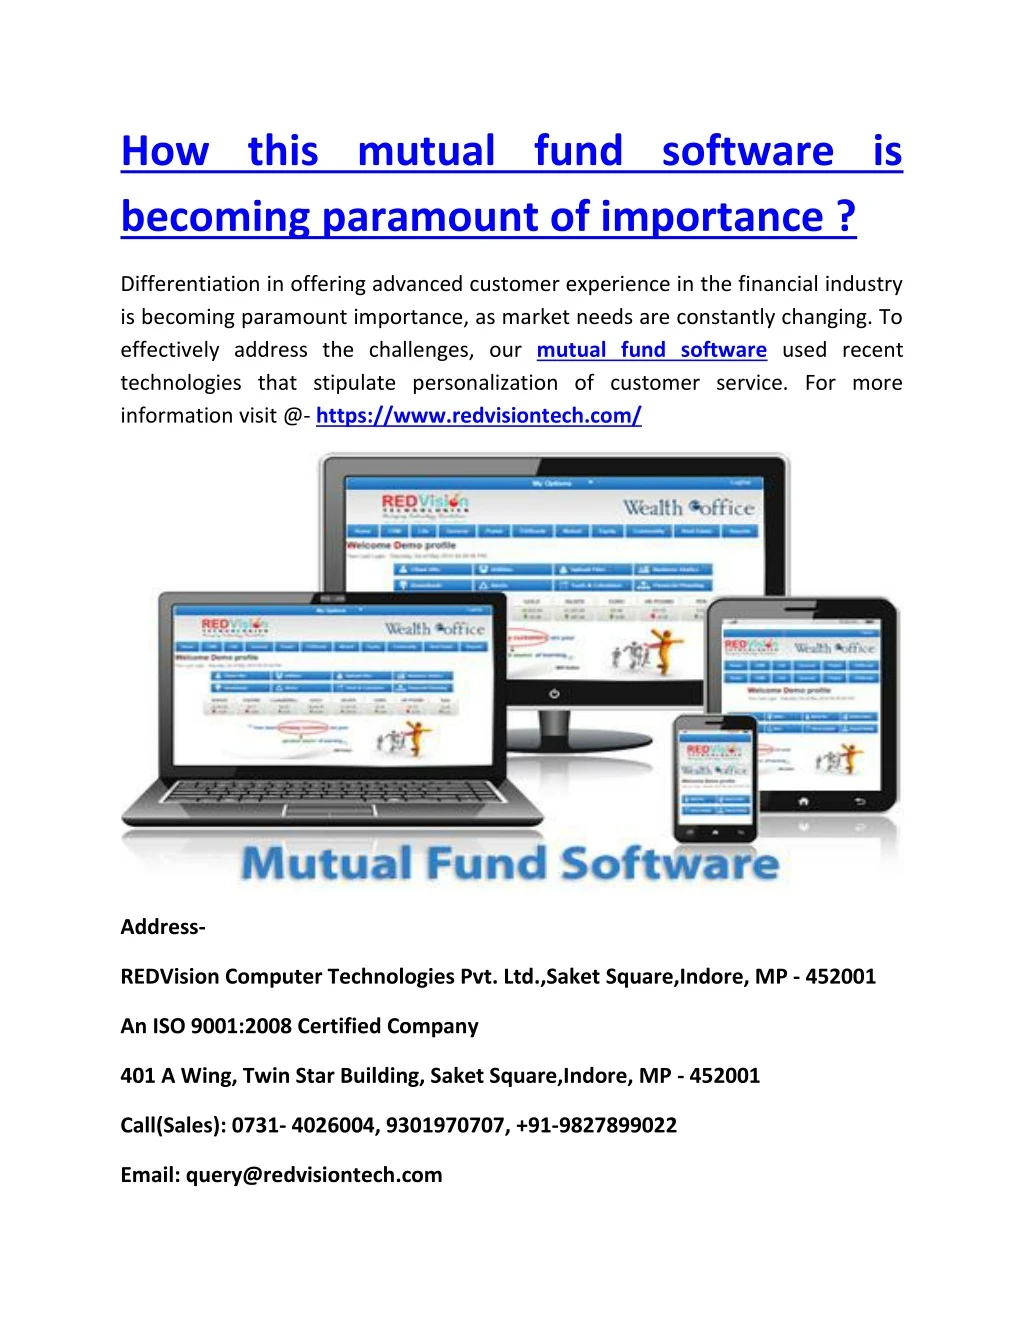 how this mutual fund software is becoming